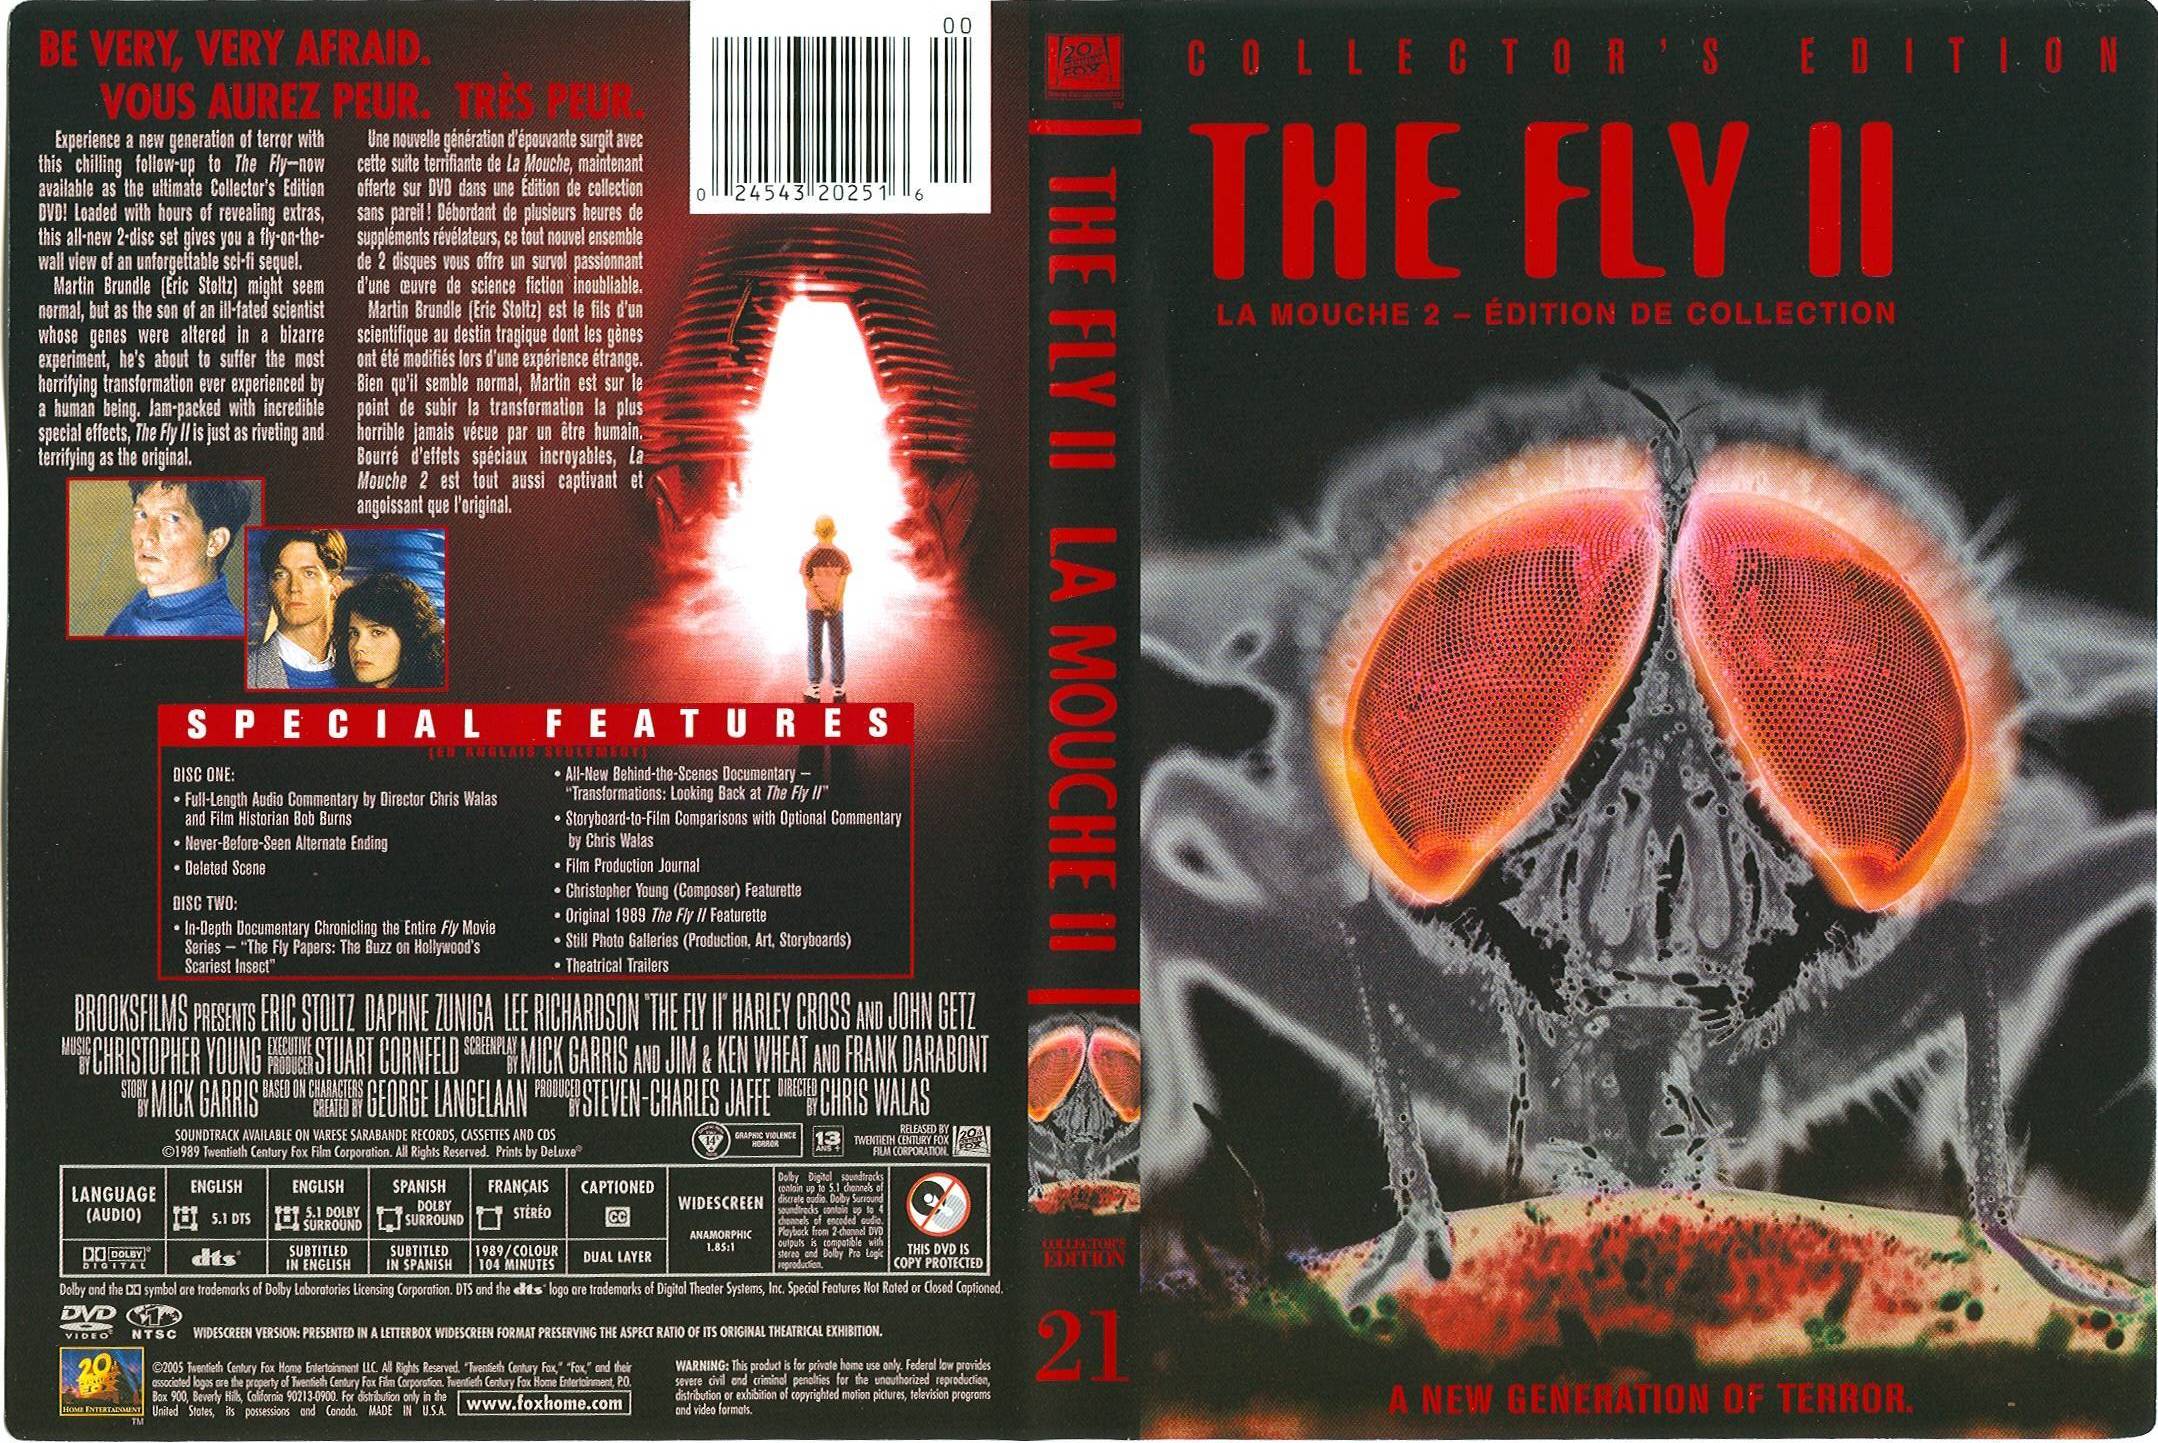 Jaquette DVD The fly 2